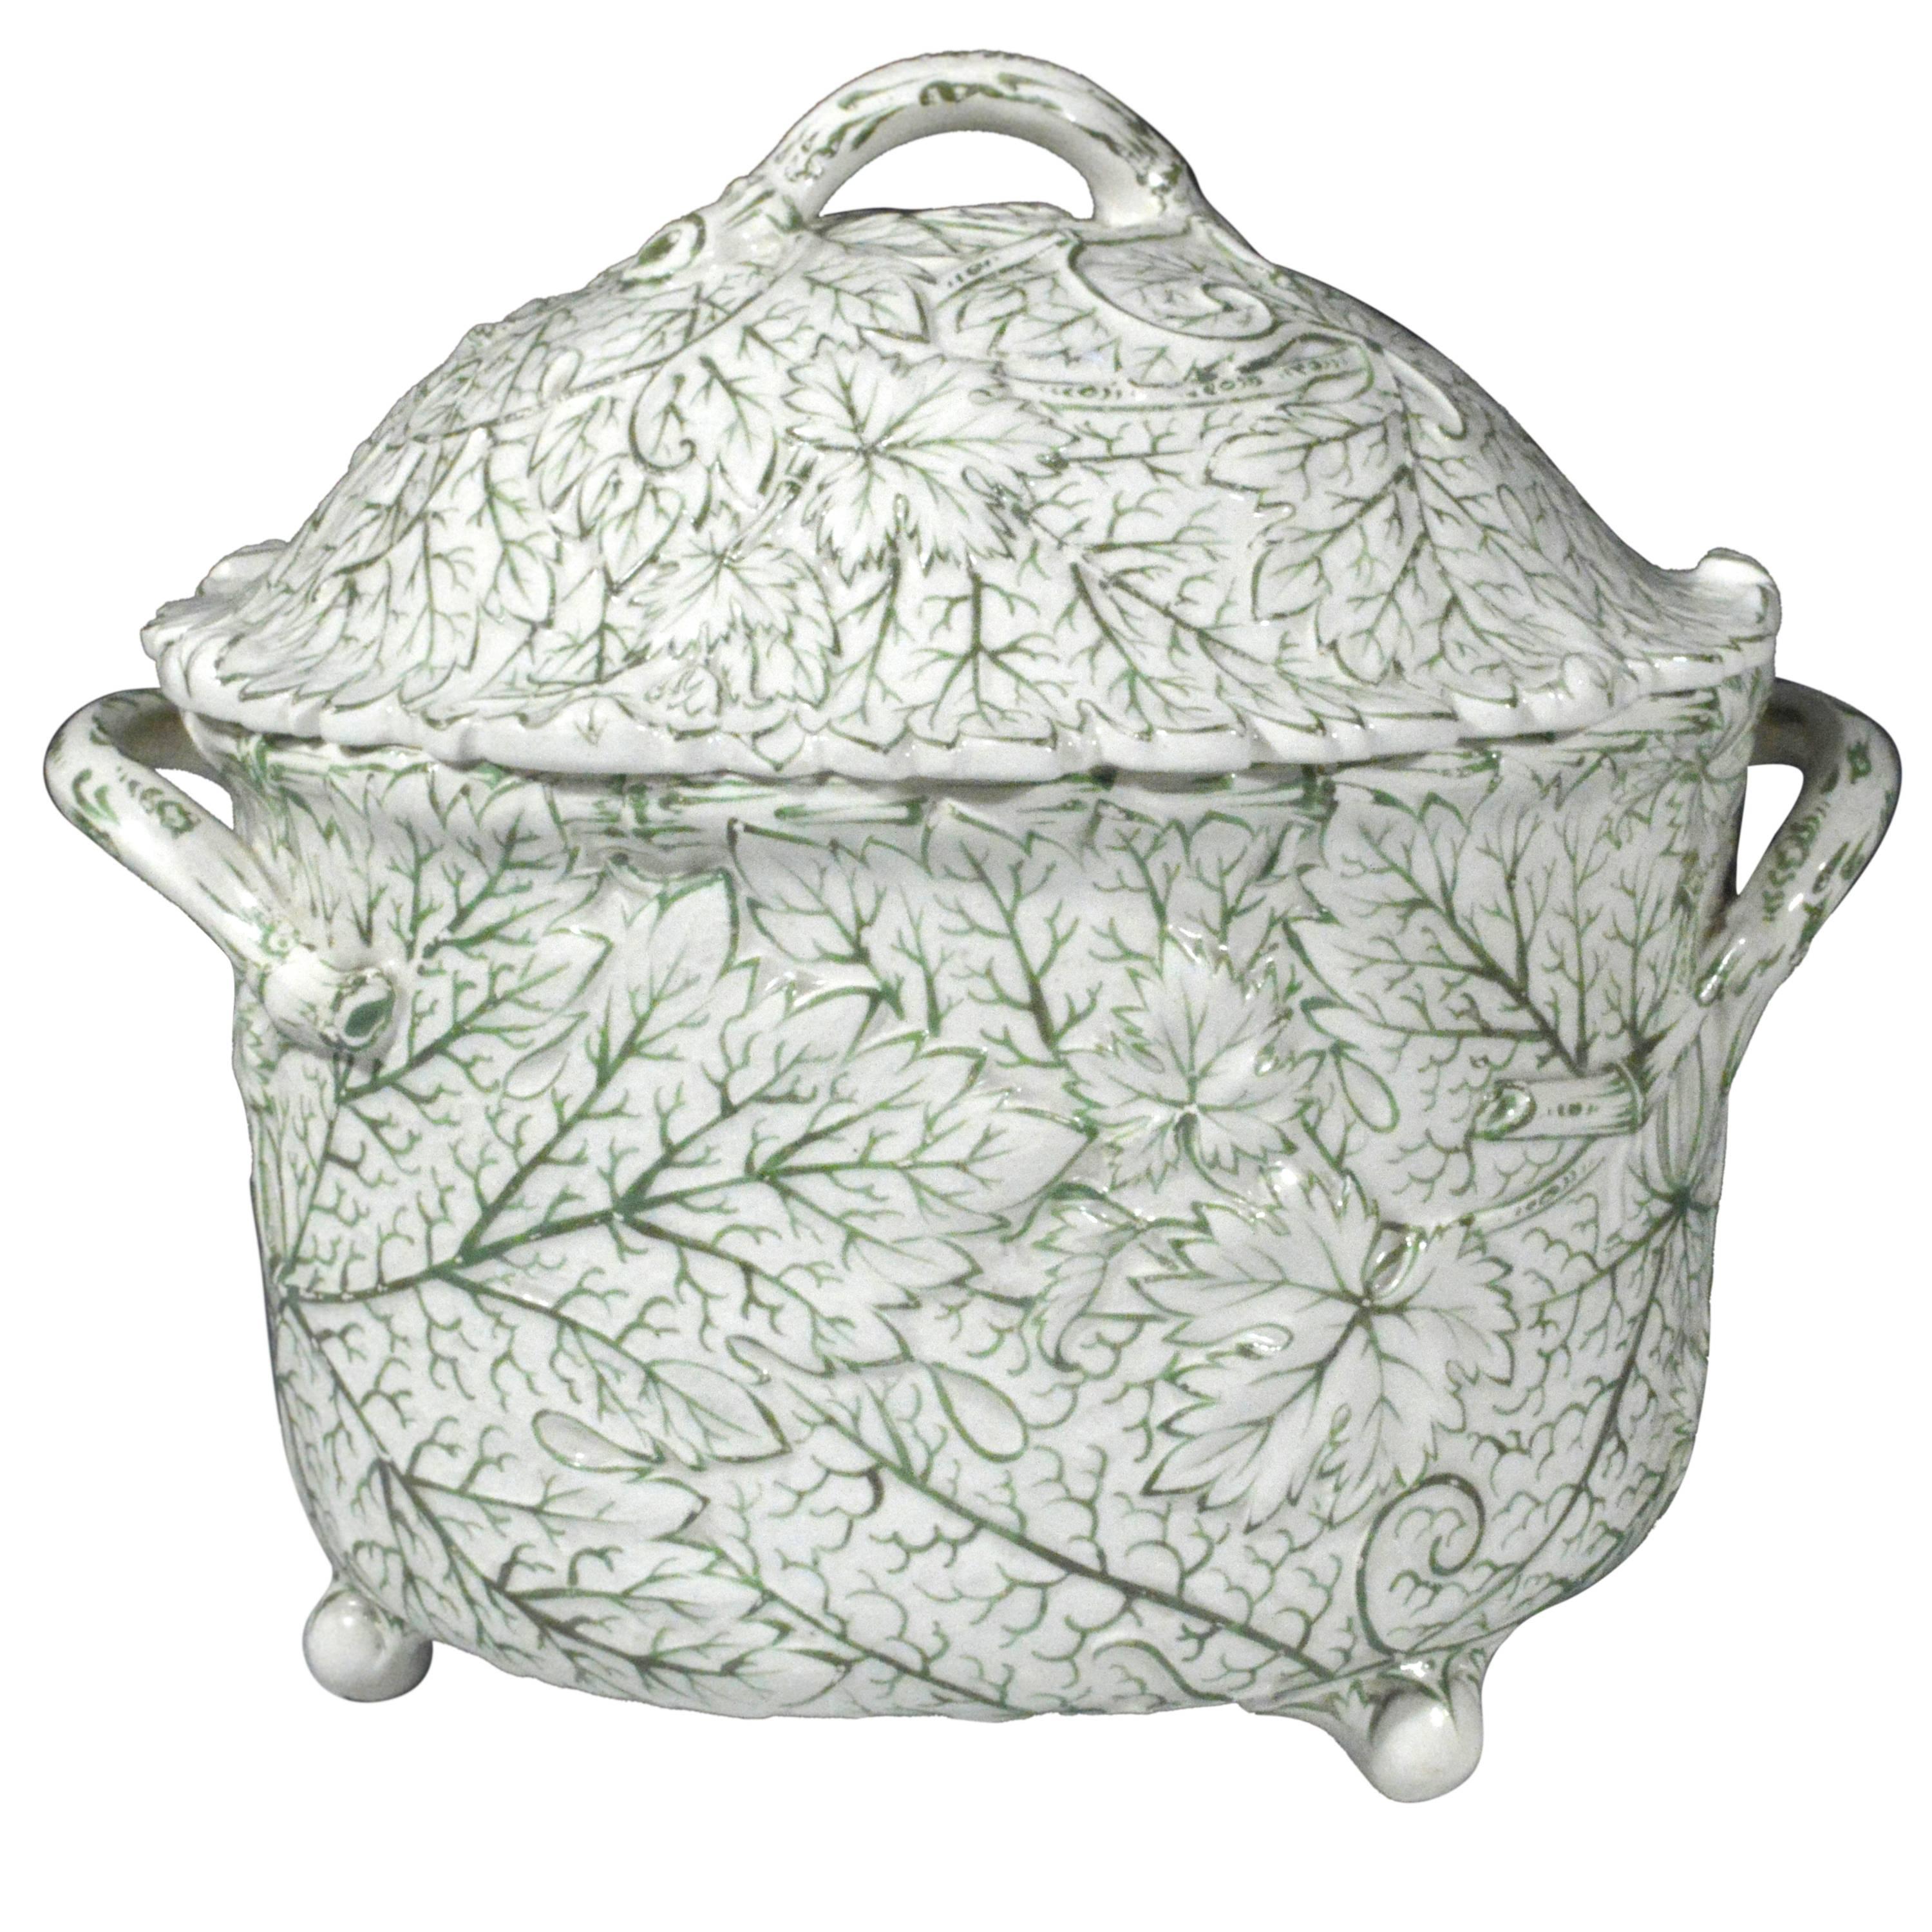 Wedgwood Pearlware Moulded Leaf Tureen and Cover, circa 1877